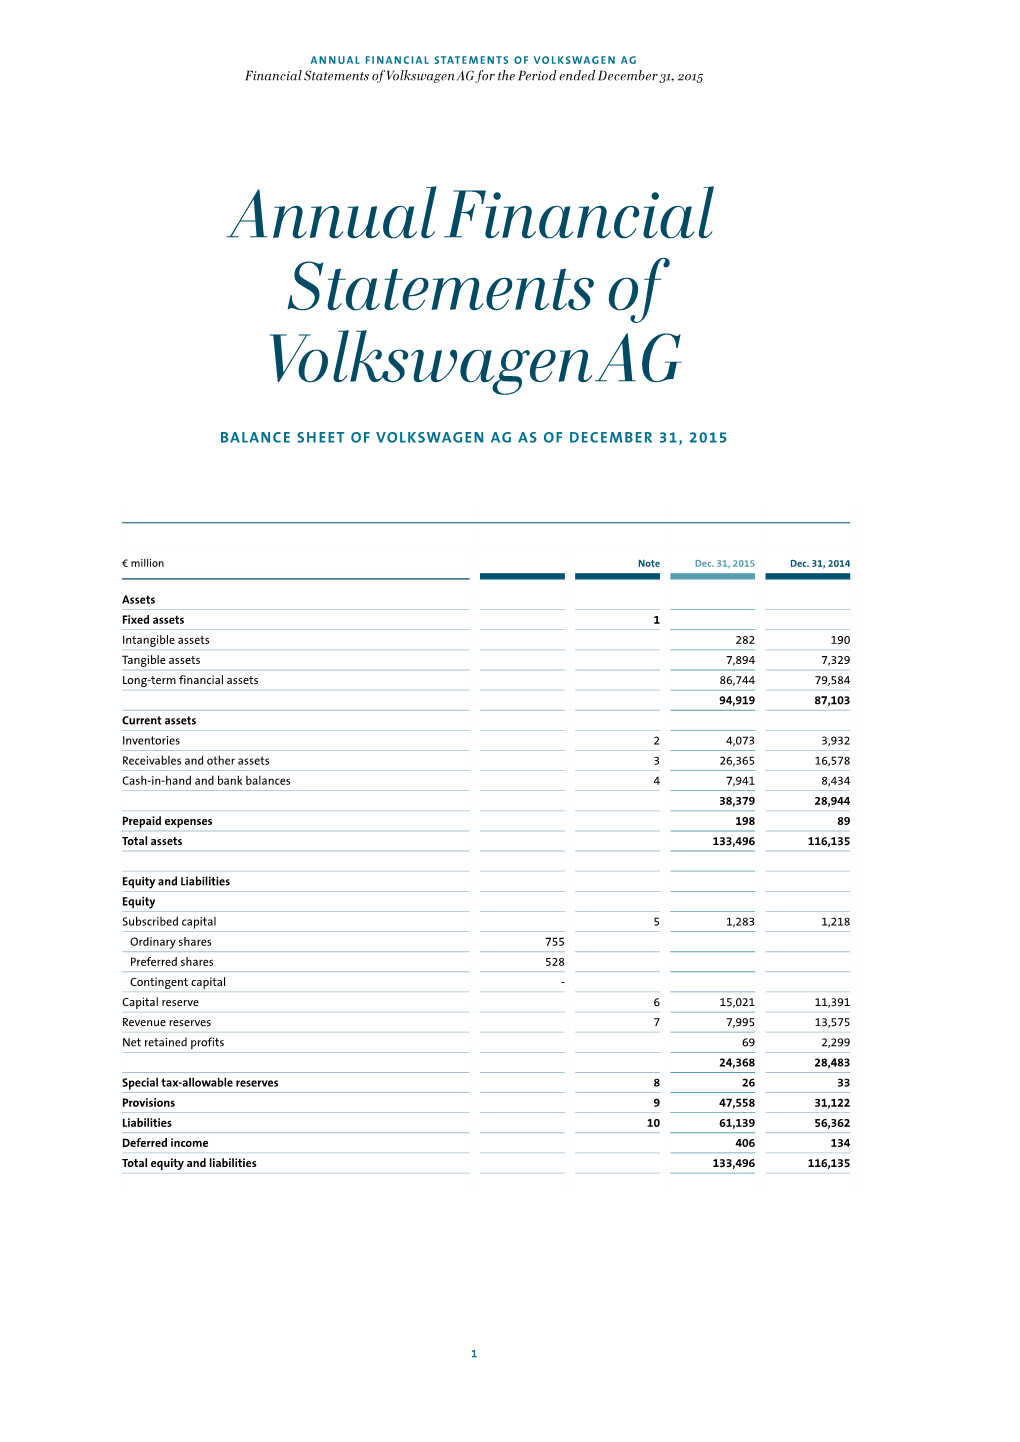 ANNUAL FINANCIAL STATEMENTS of VOLKSWAGEN AG Financial Statements of Volkswagen AG for the Period Ended December 31, 2015